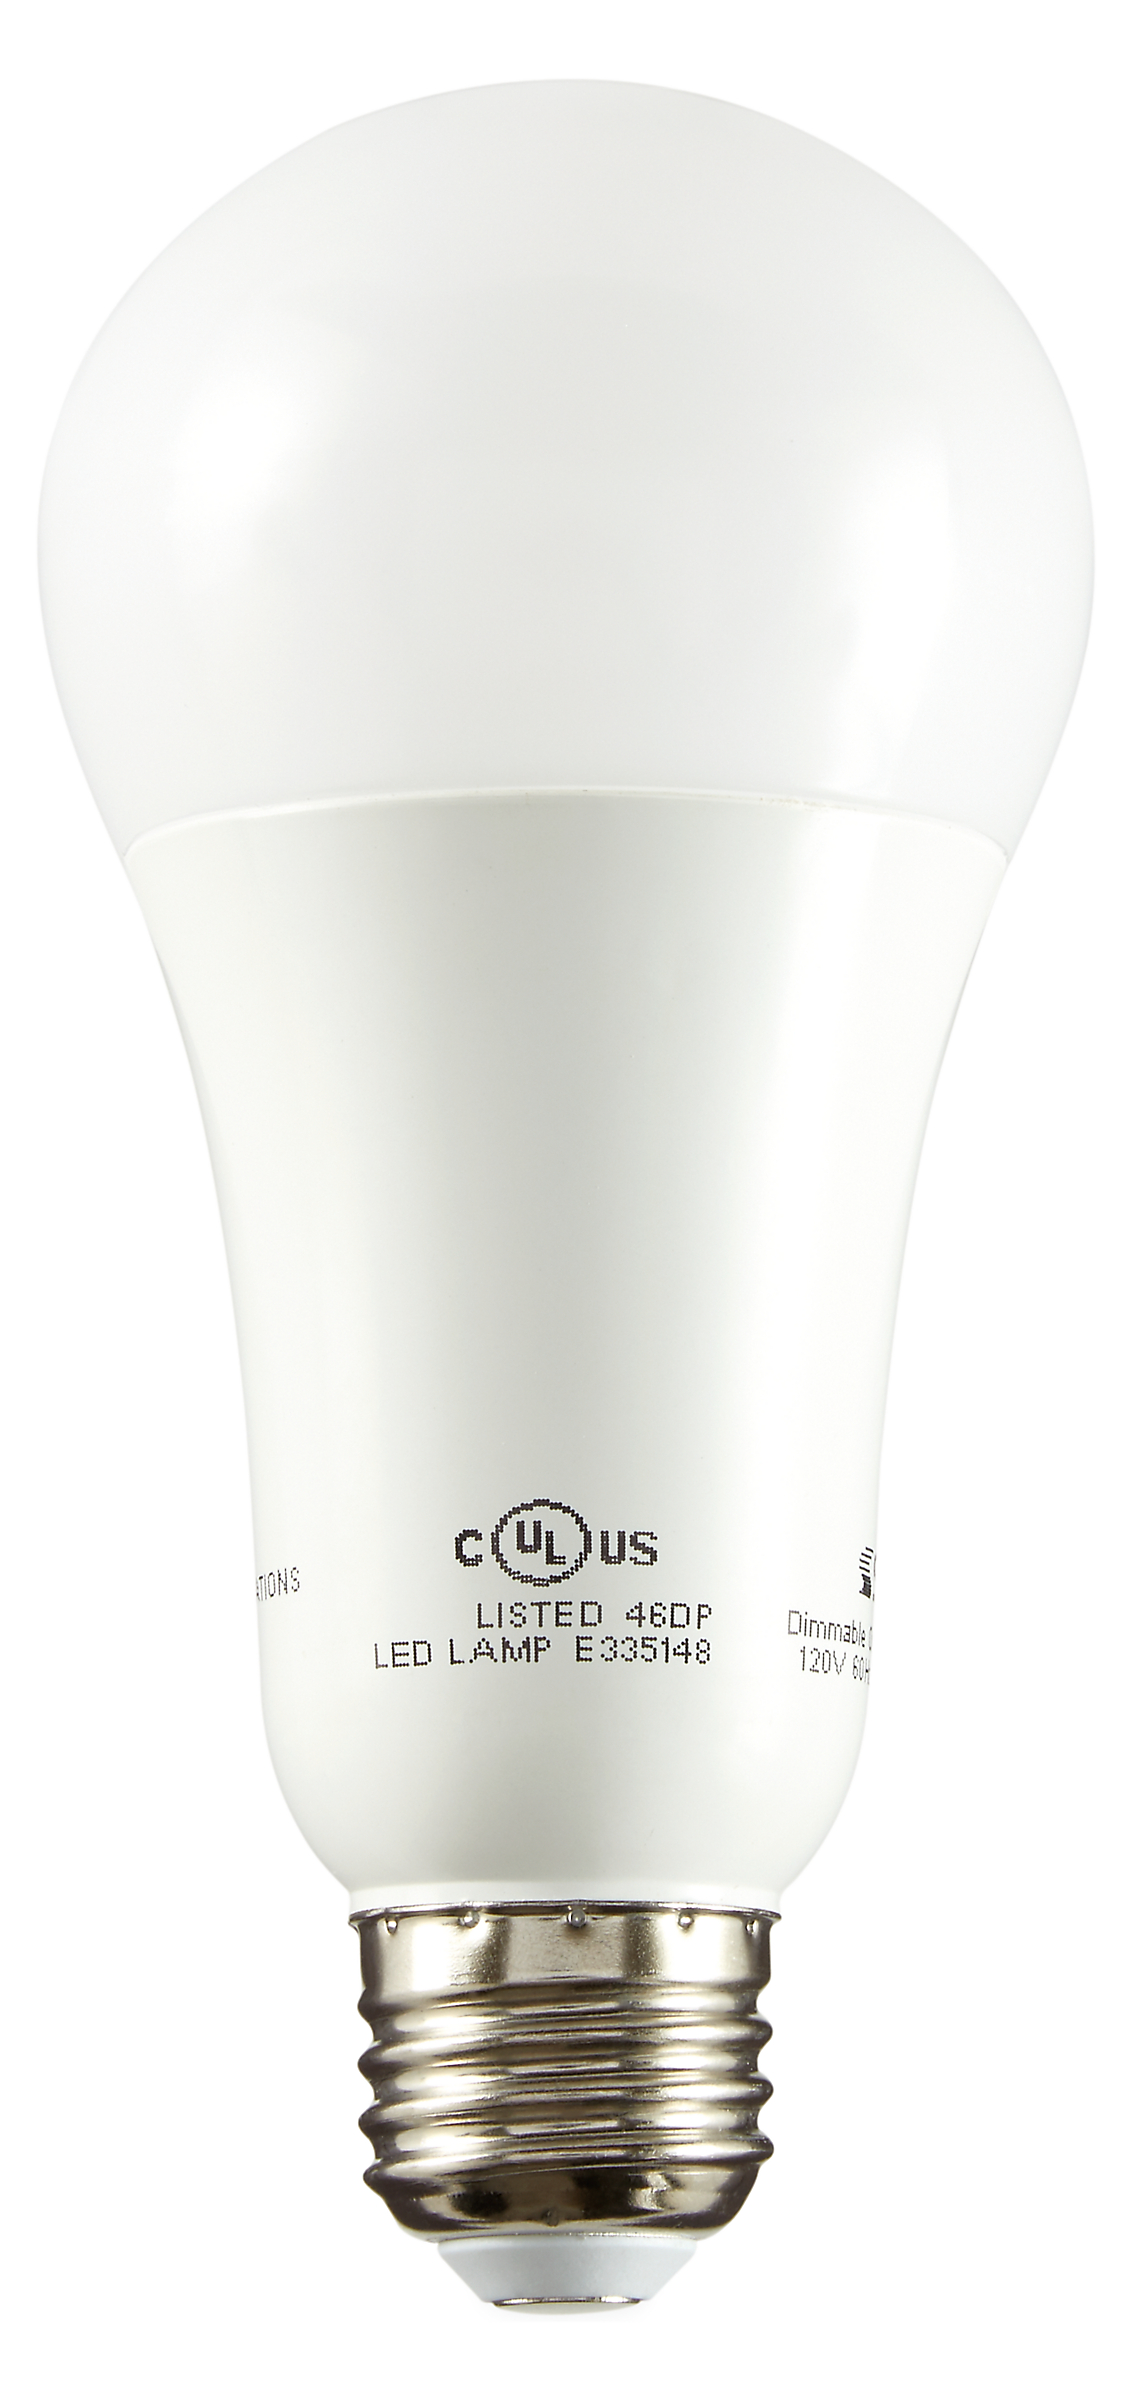 LED Dimmable Light Bulb, 100w Comparable